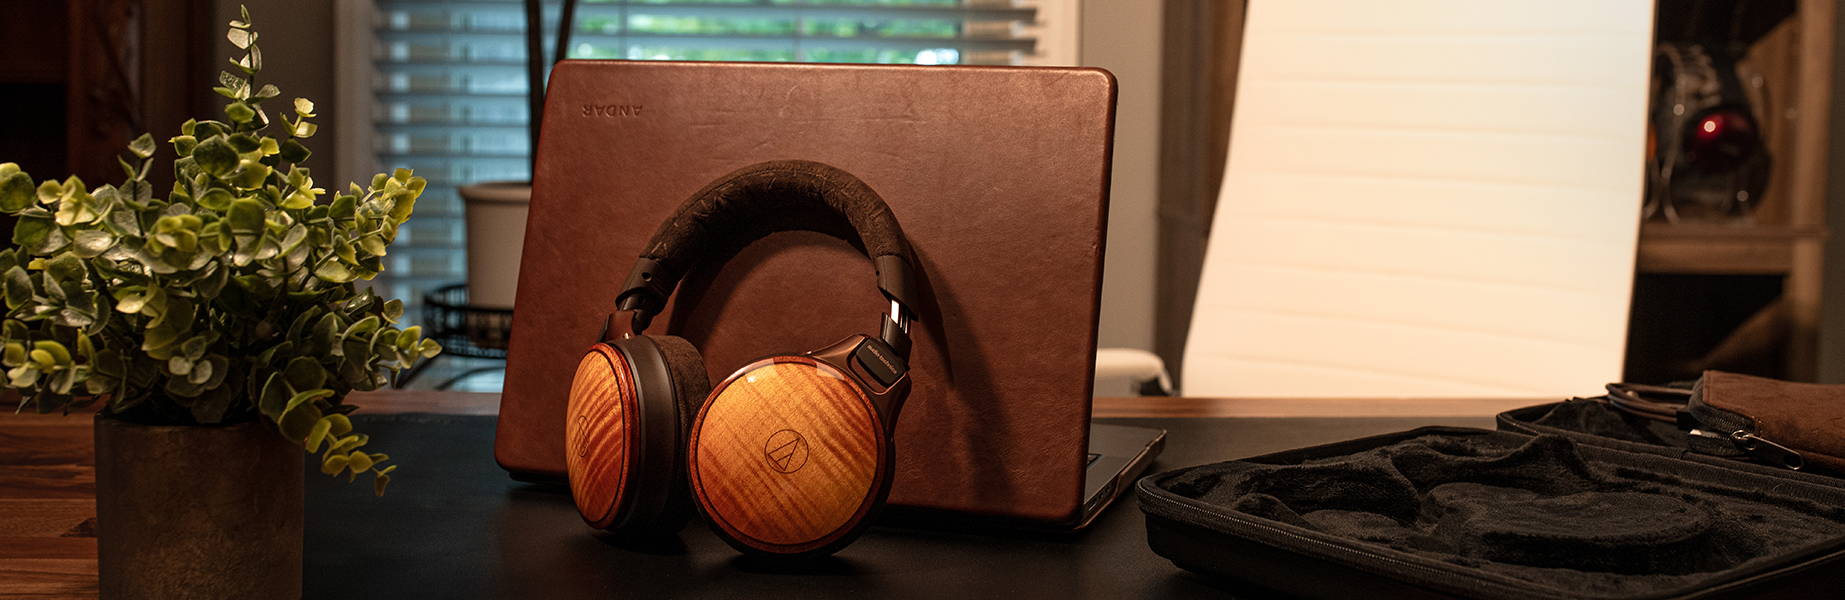 WB2022 Headphones with a laptop on a table